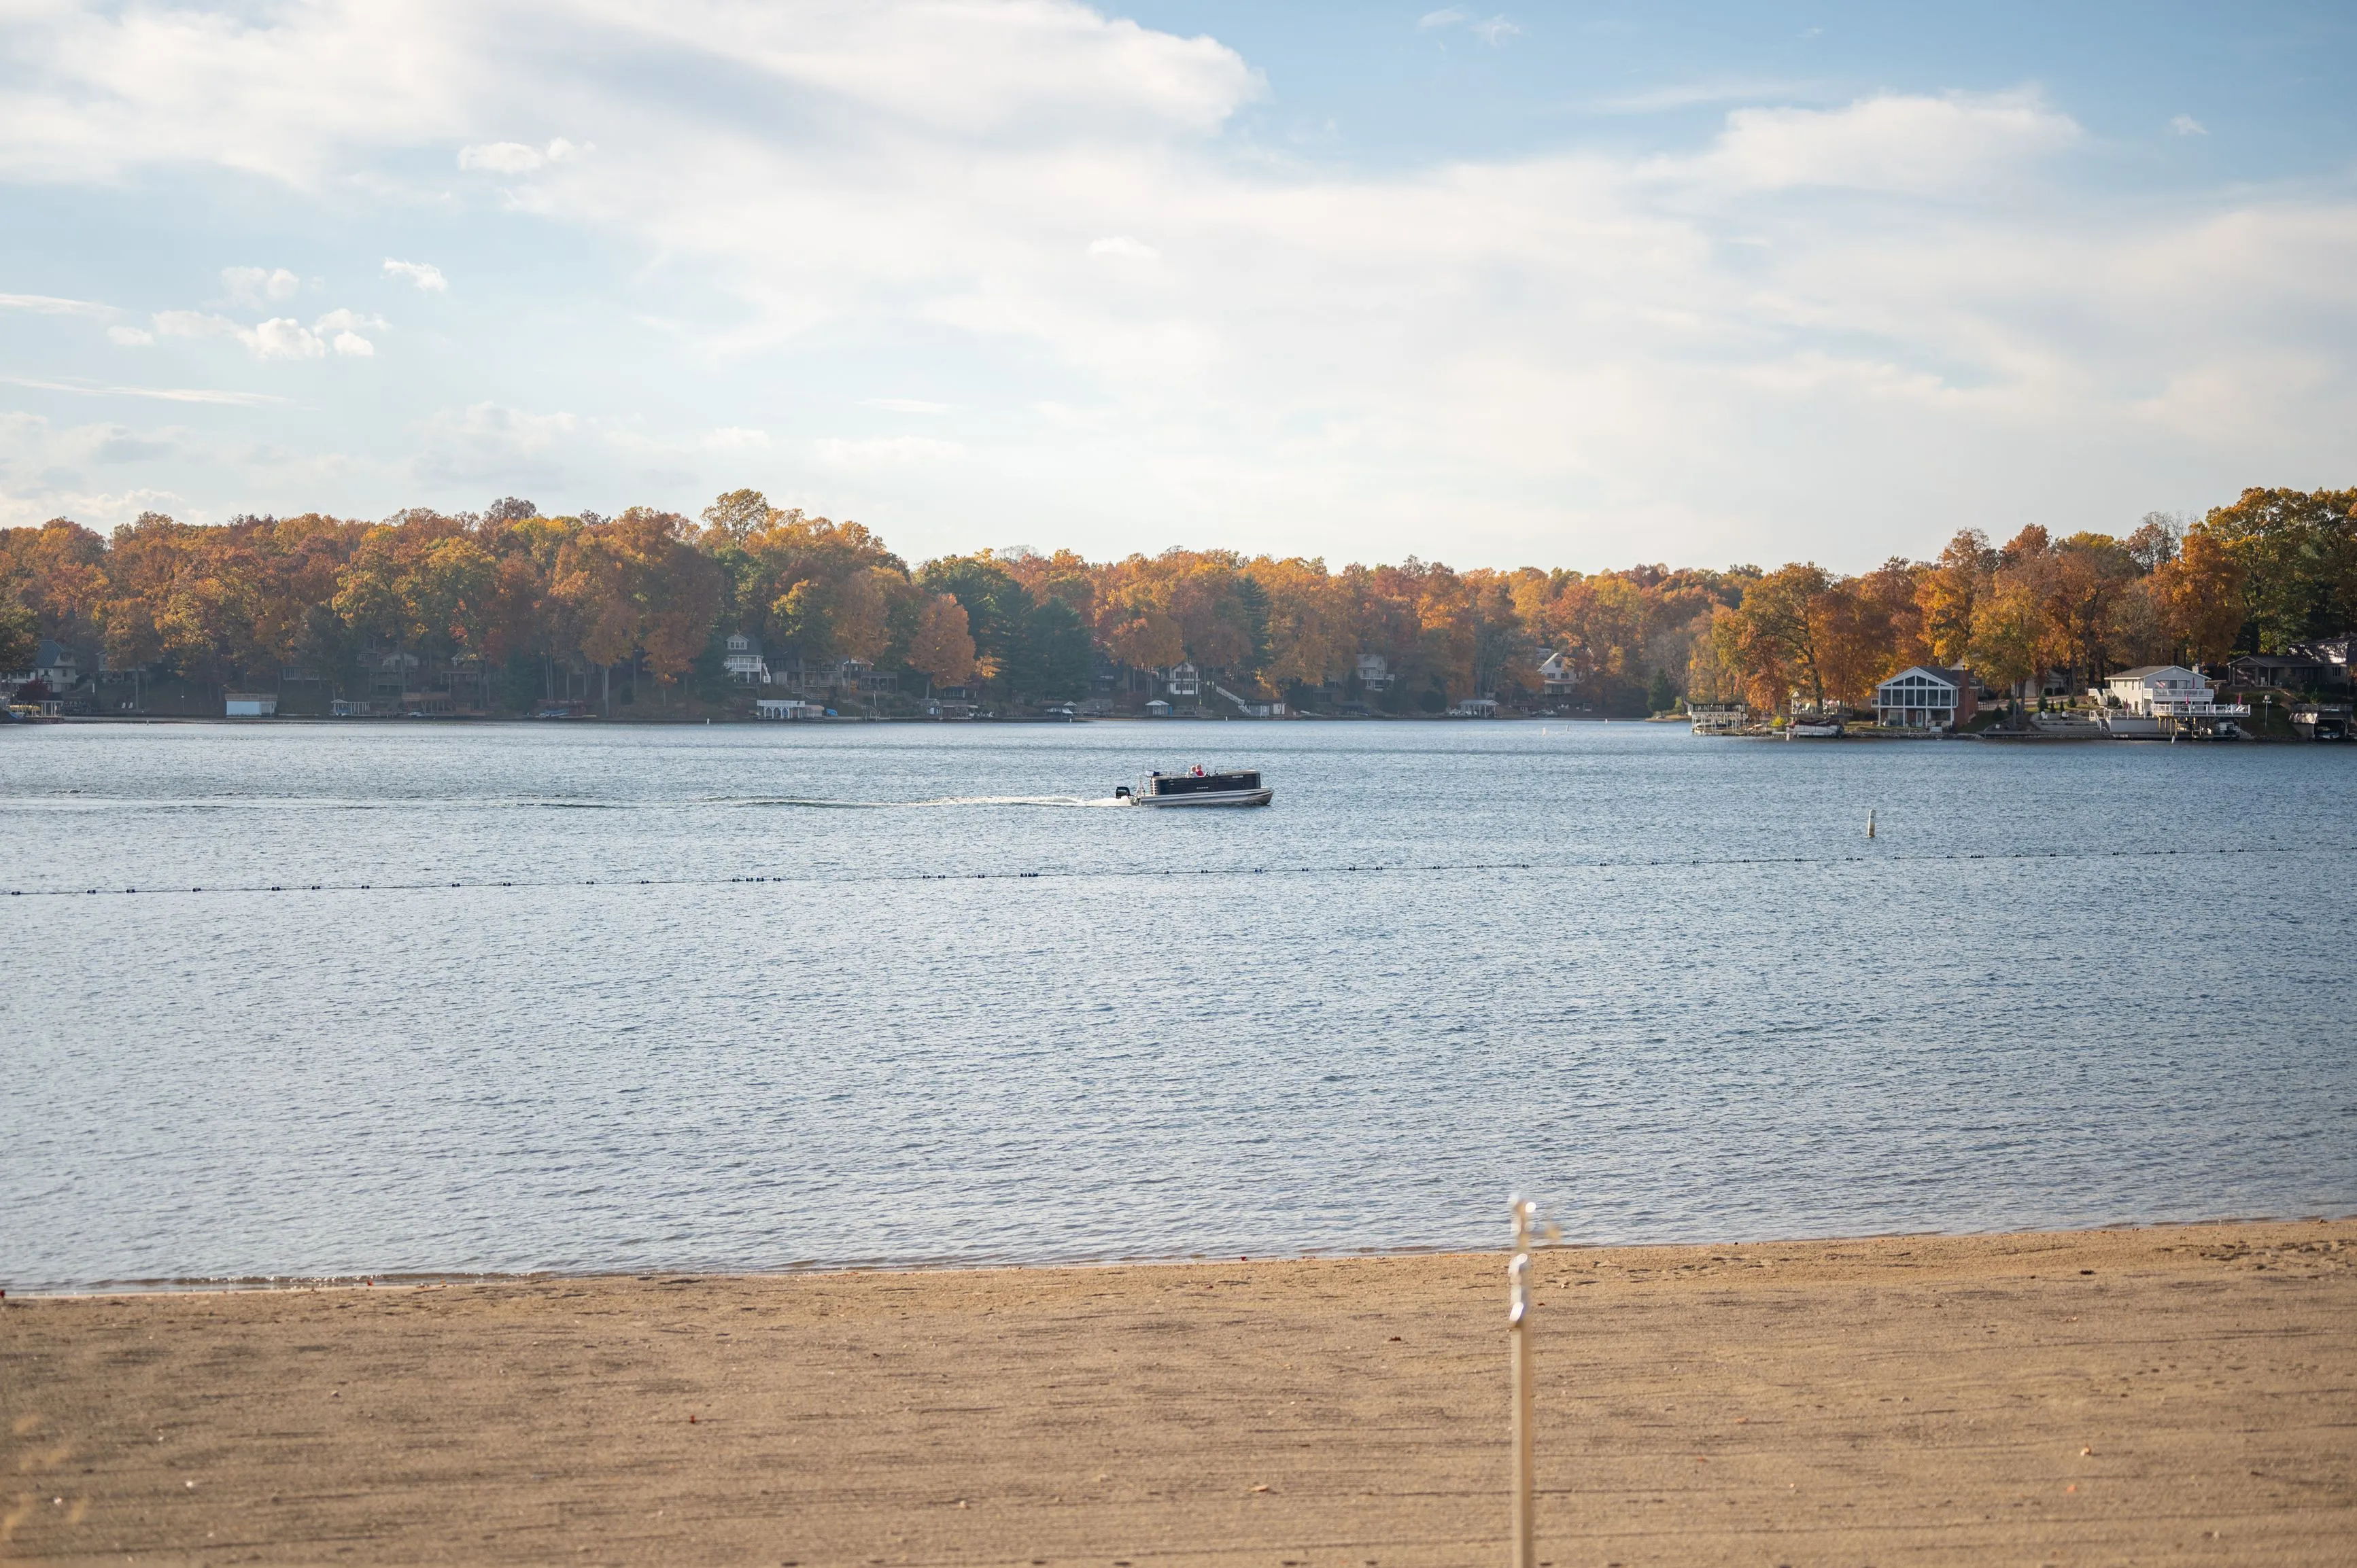 A tranquil lake with a boat in the distance and trees with autumn foliage on the far shore, viewed from a sandy beach.